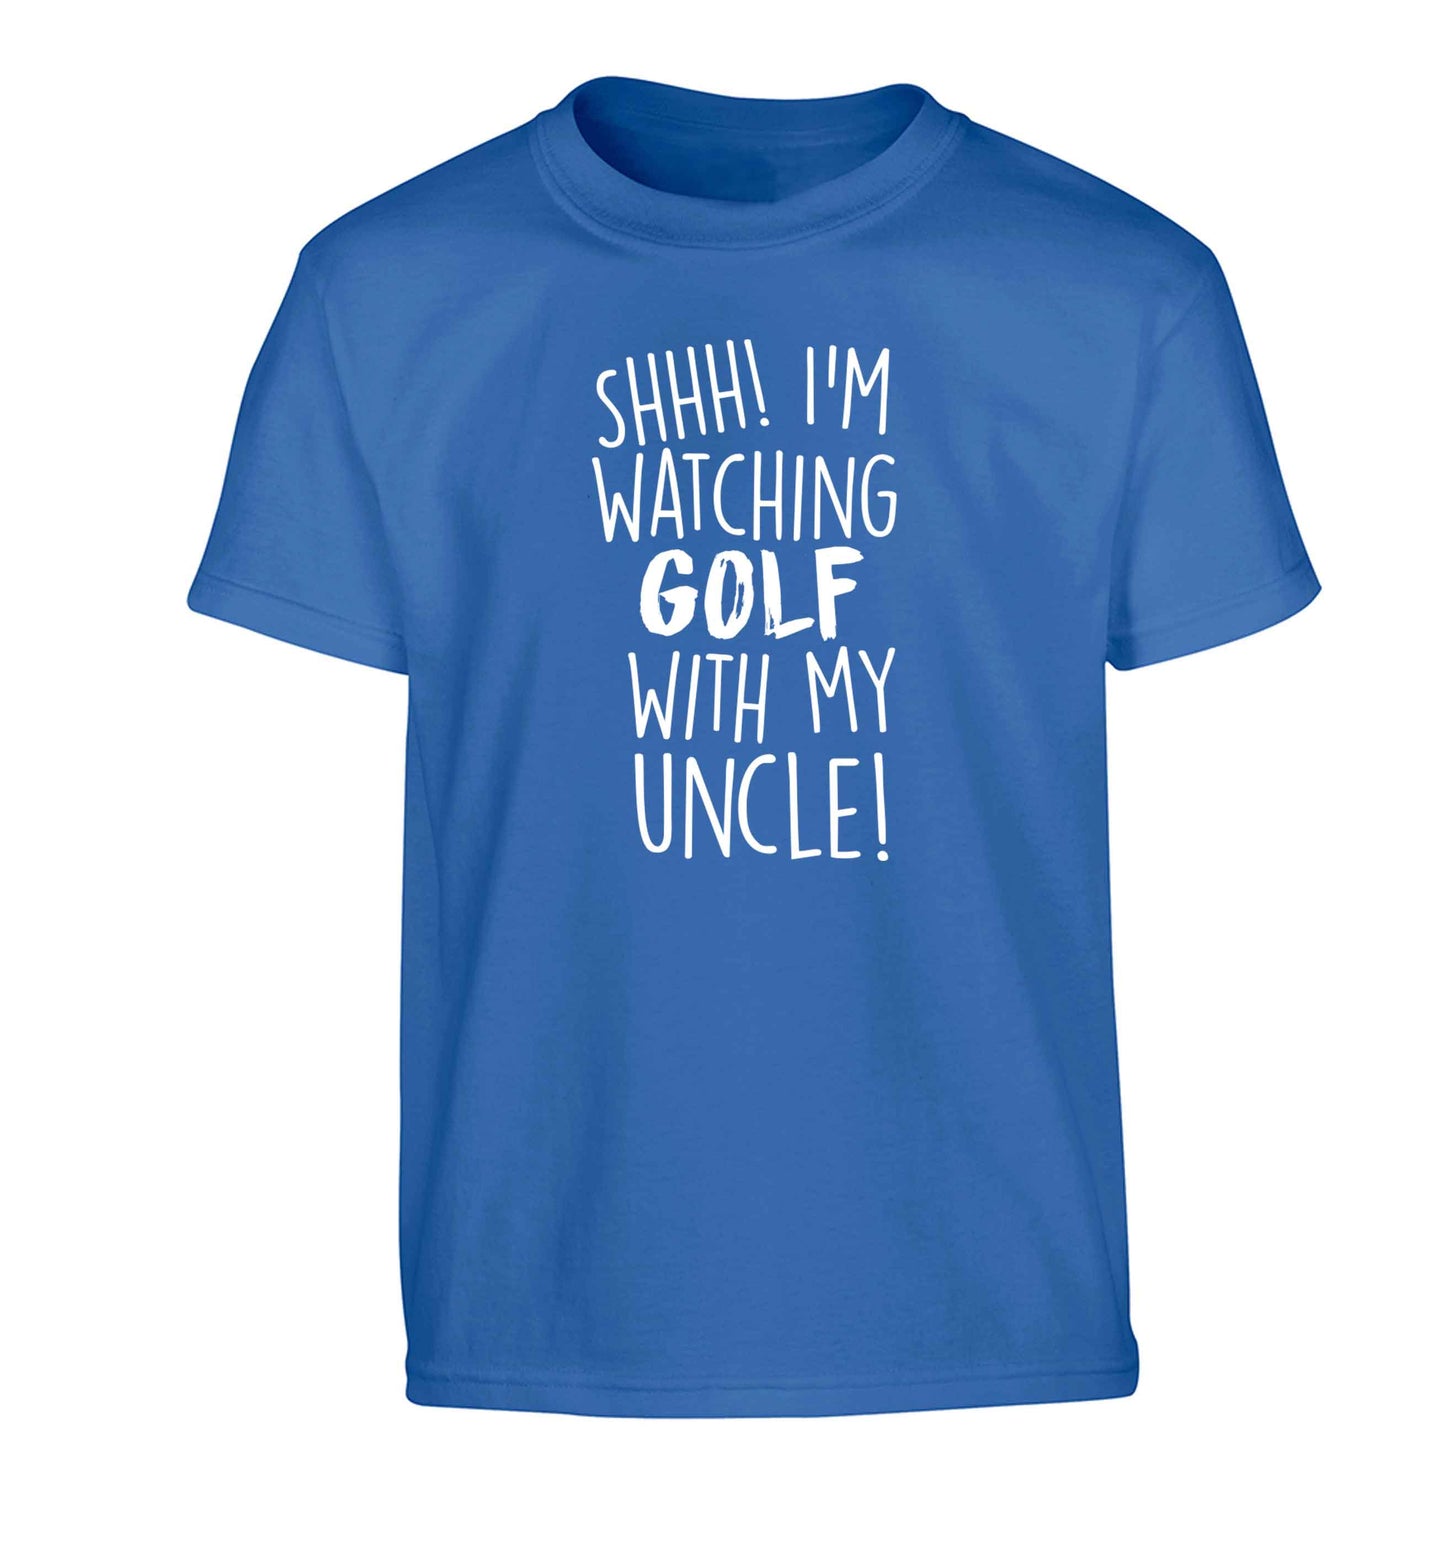 Shh I'm watching golf with my uncle Children's blue Tshirt 12-13 Years